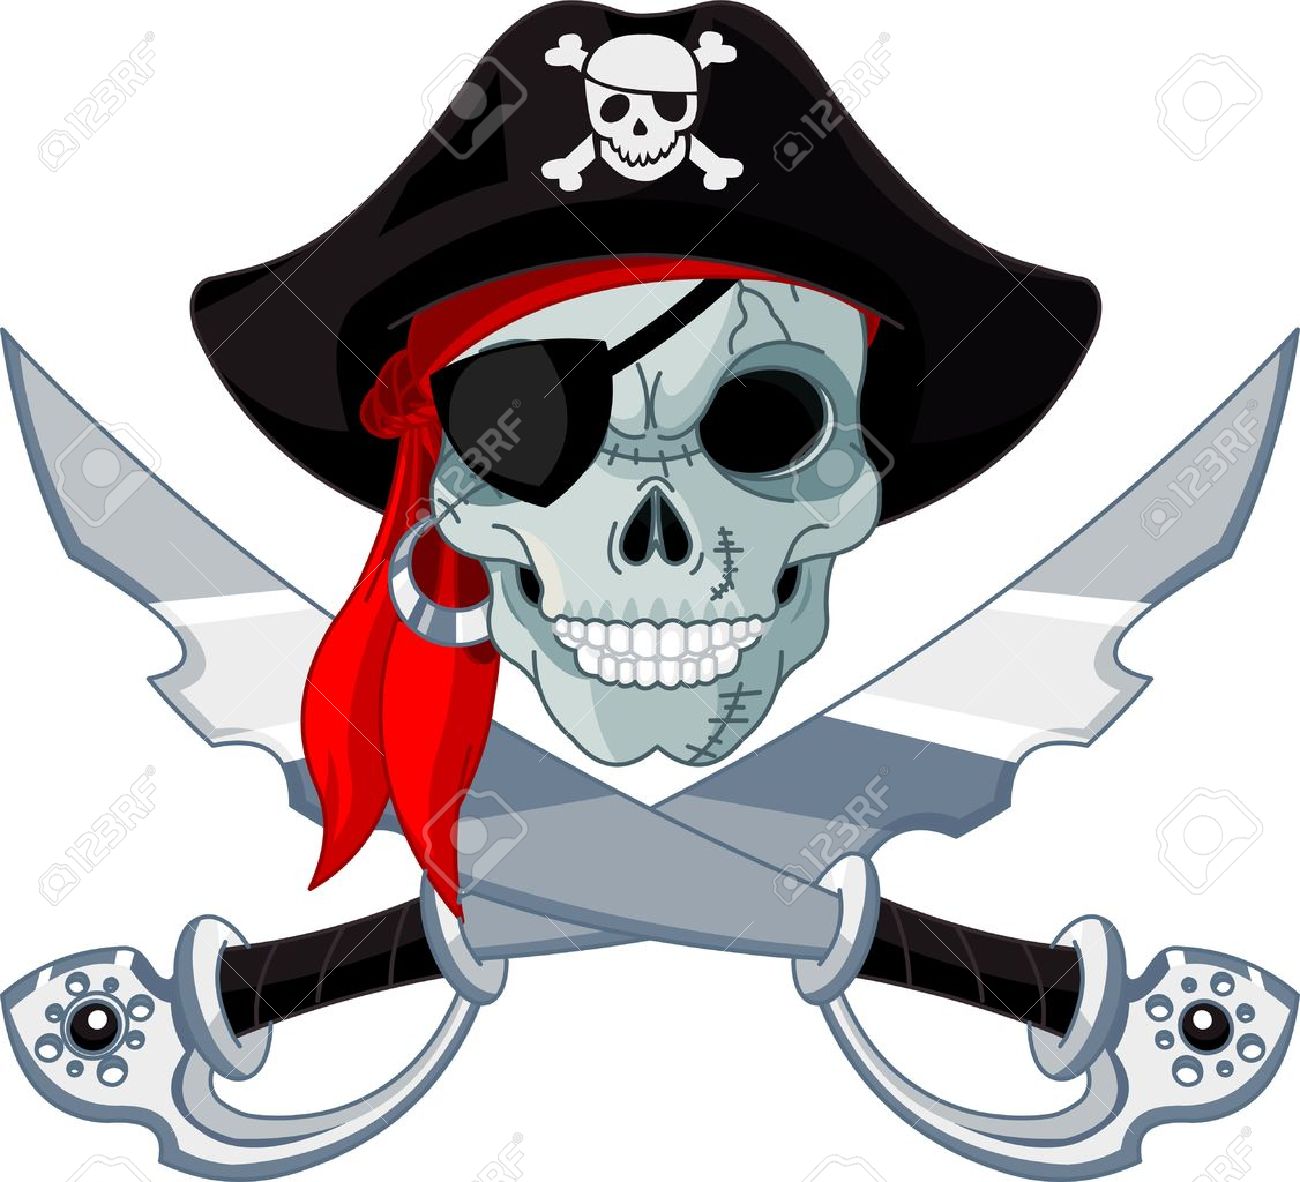 Pirates Of The Caribbean Clipart skull